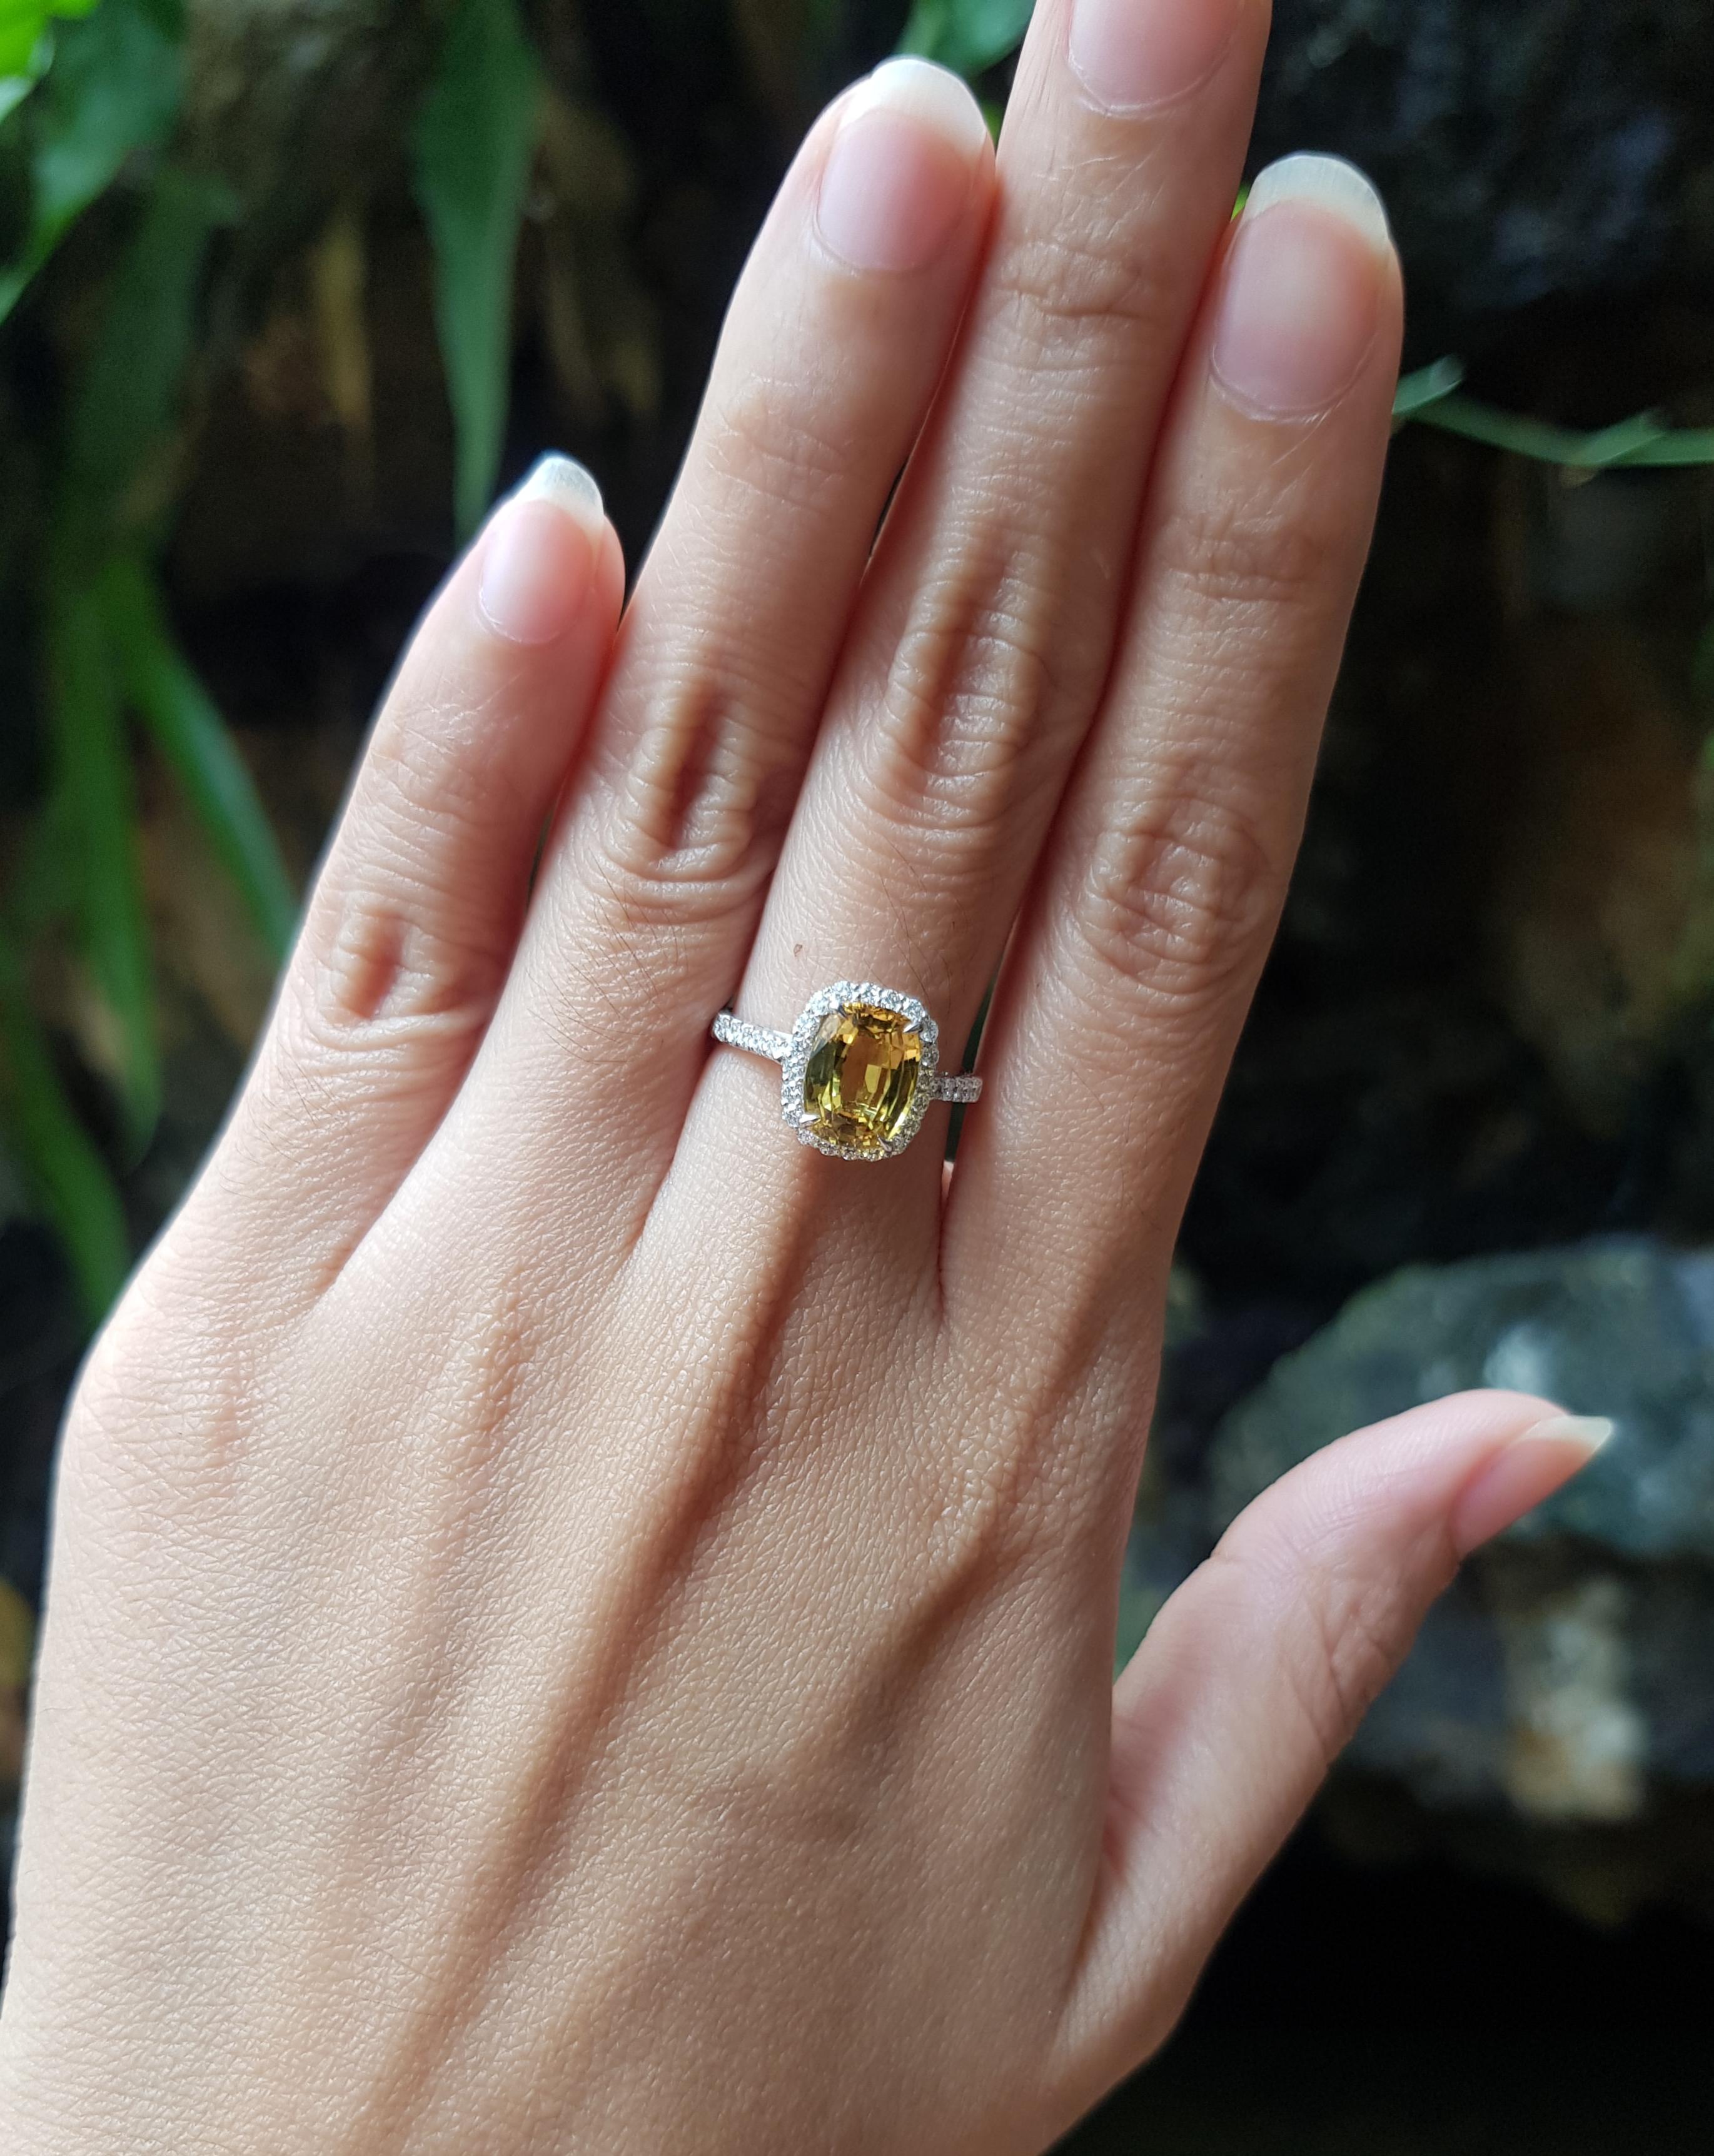 Yellow Sapphire 2.18 carats with Diamond 0.31 carat Ring set in 18 Karat White Gold Settings

Width:  0.9 cm 
Length: 1.1 cm
Ring Size: 52
Total Weight: 3.01 grams

Yellow Sapphire 
Width:  0.6 cm 
Length: 0.8 cm

